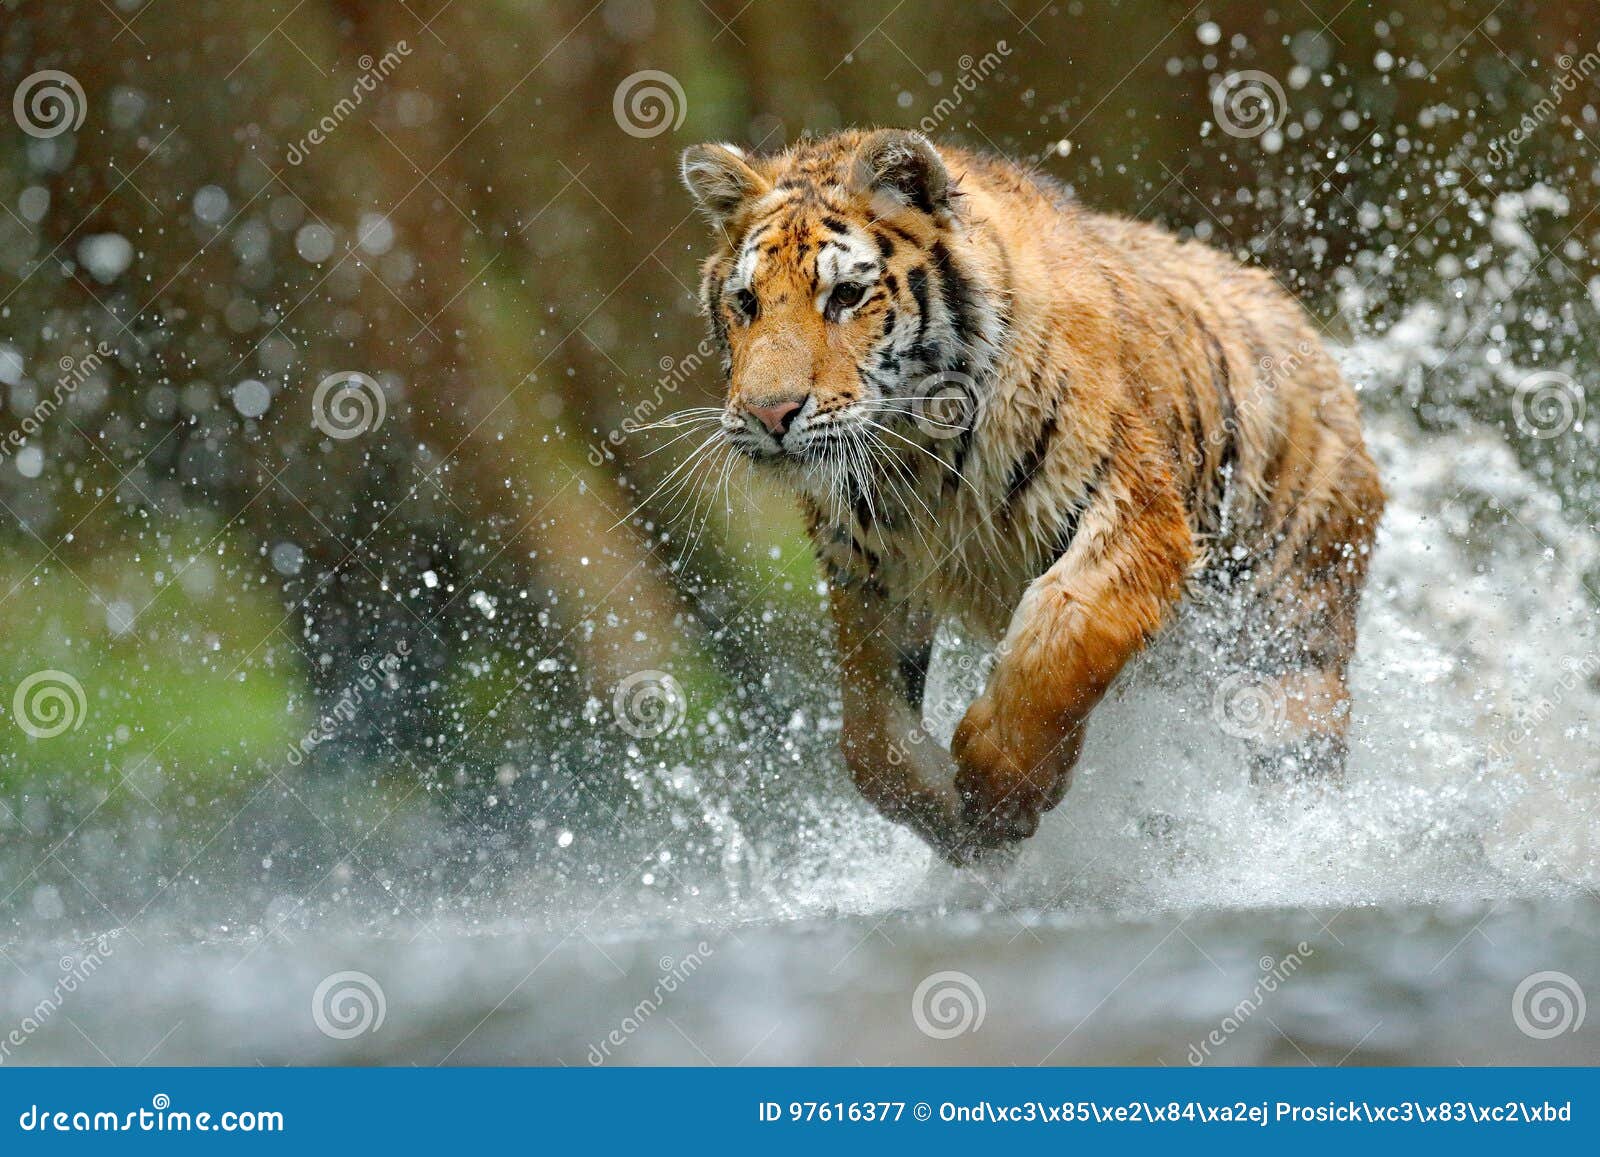 tiger running in water. danger animal, tajga in russia. animal in the forest stream. grey stone, river droplet. tiger with splash